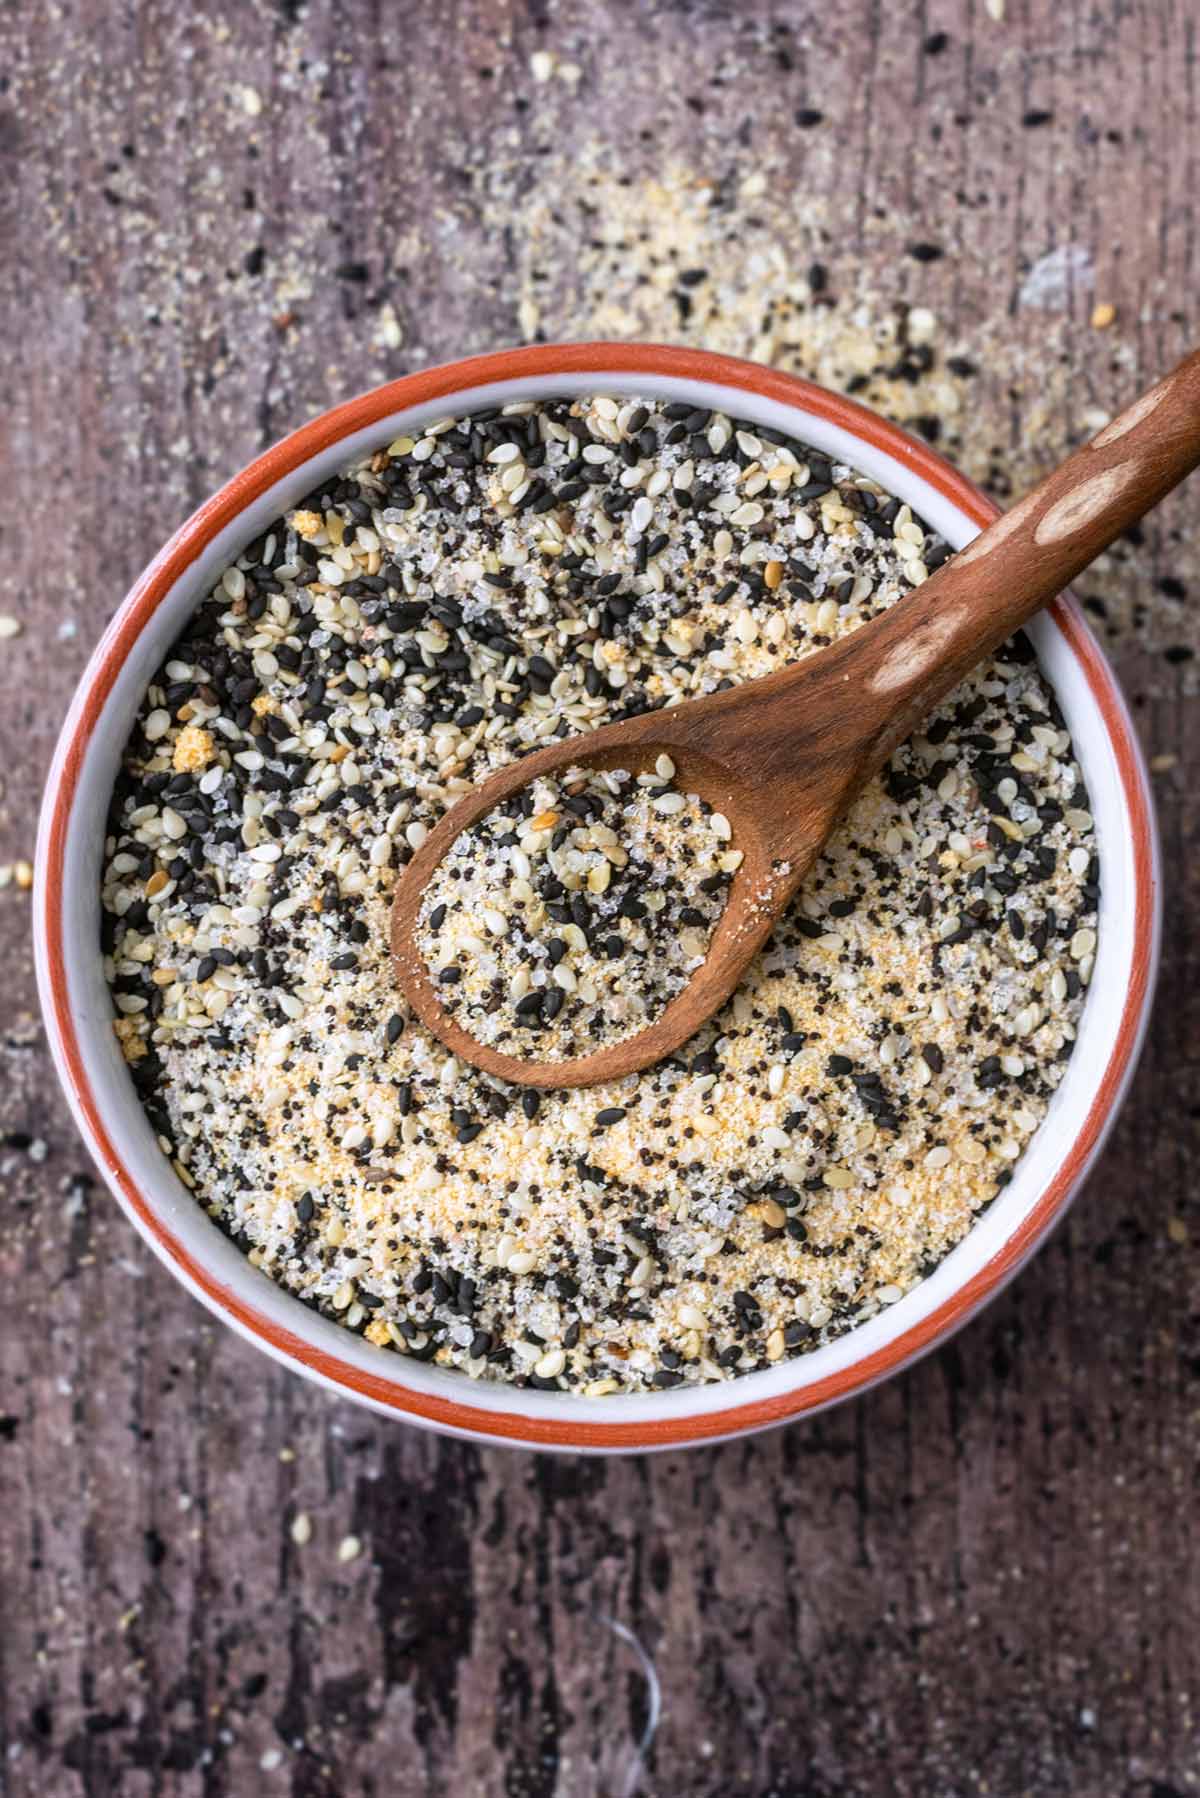 A bowl of sesame seed based seasoning with a spoon in it.